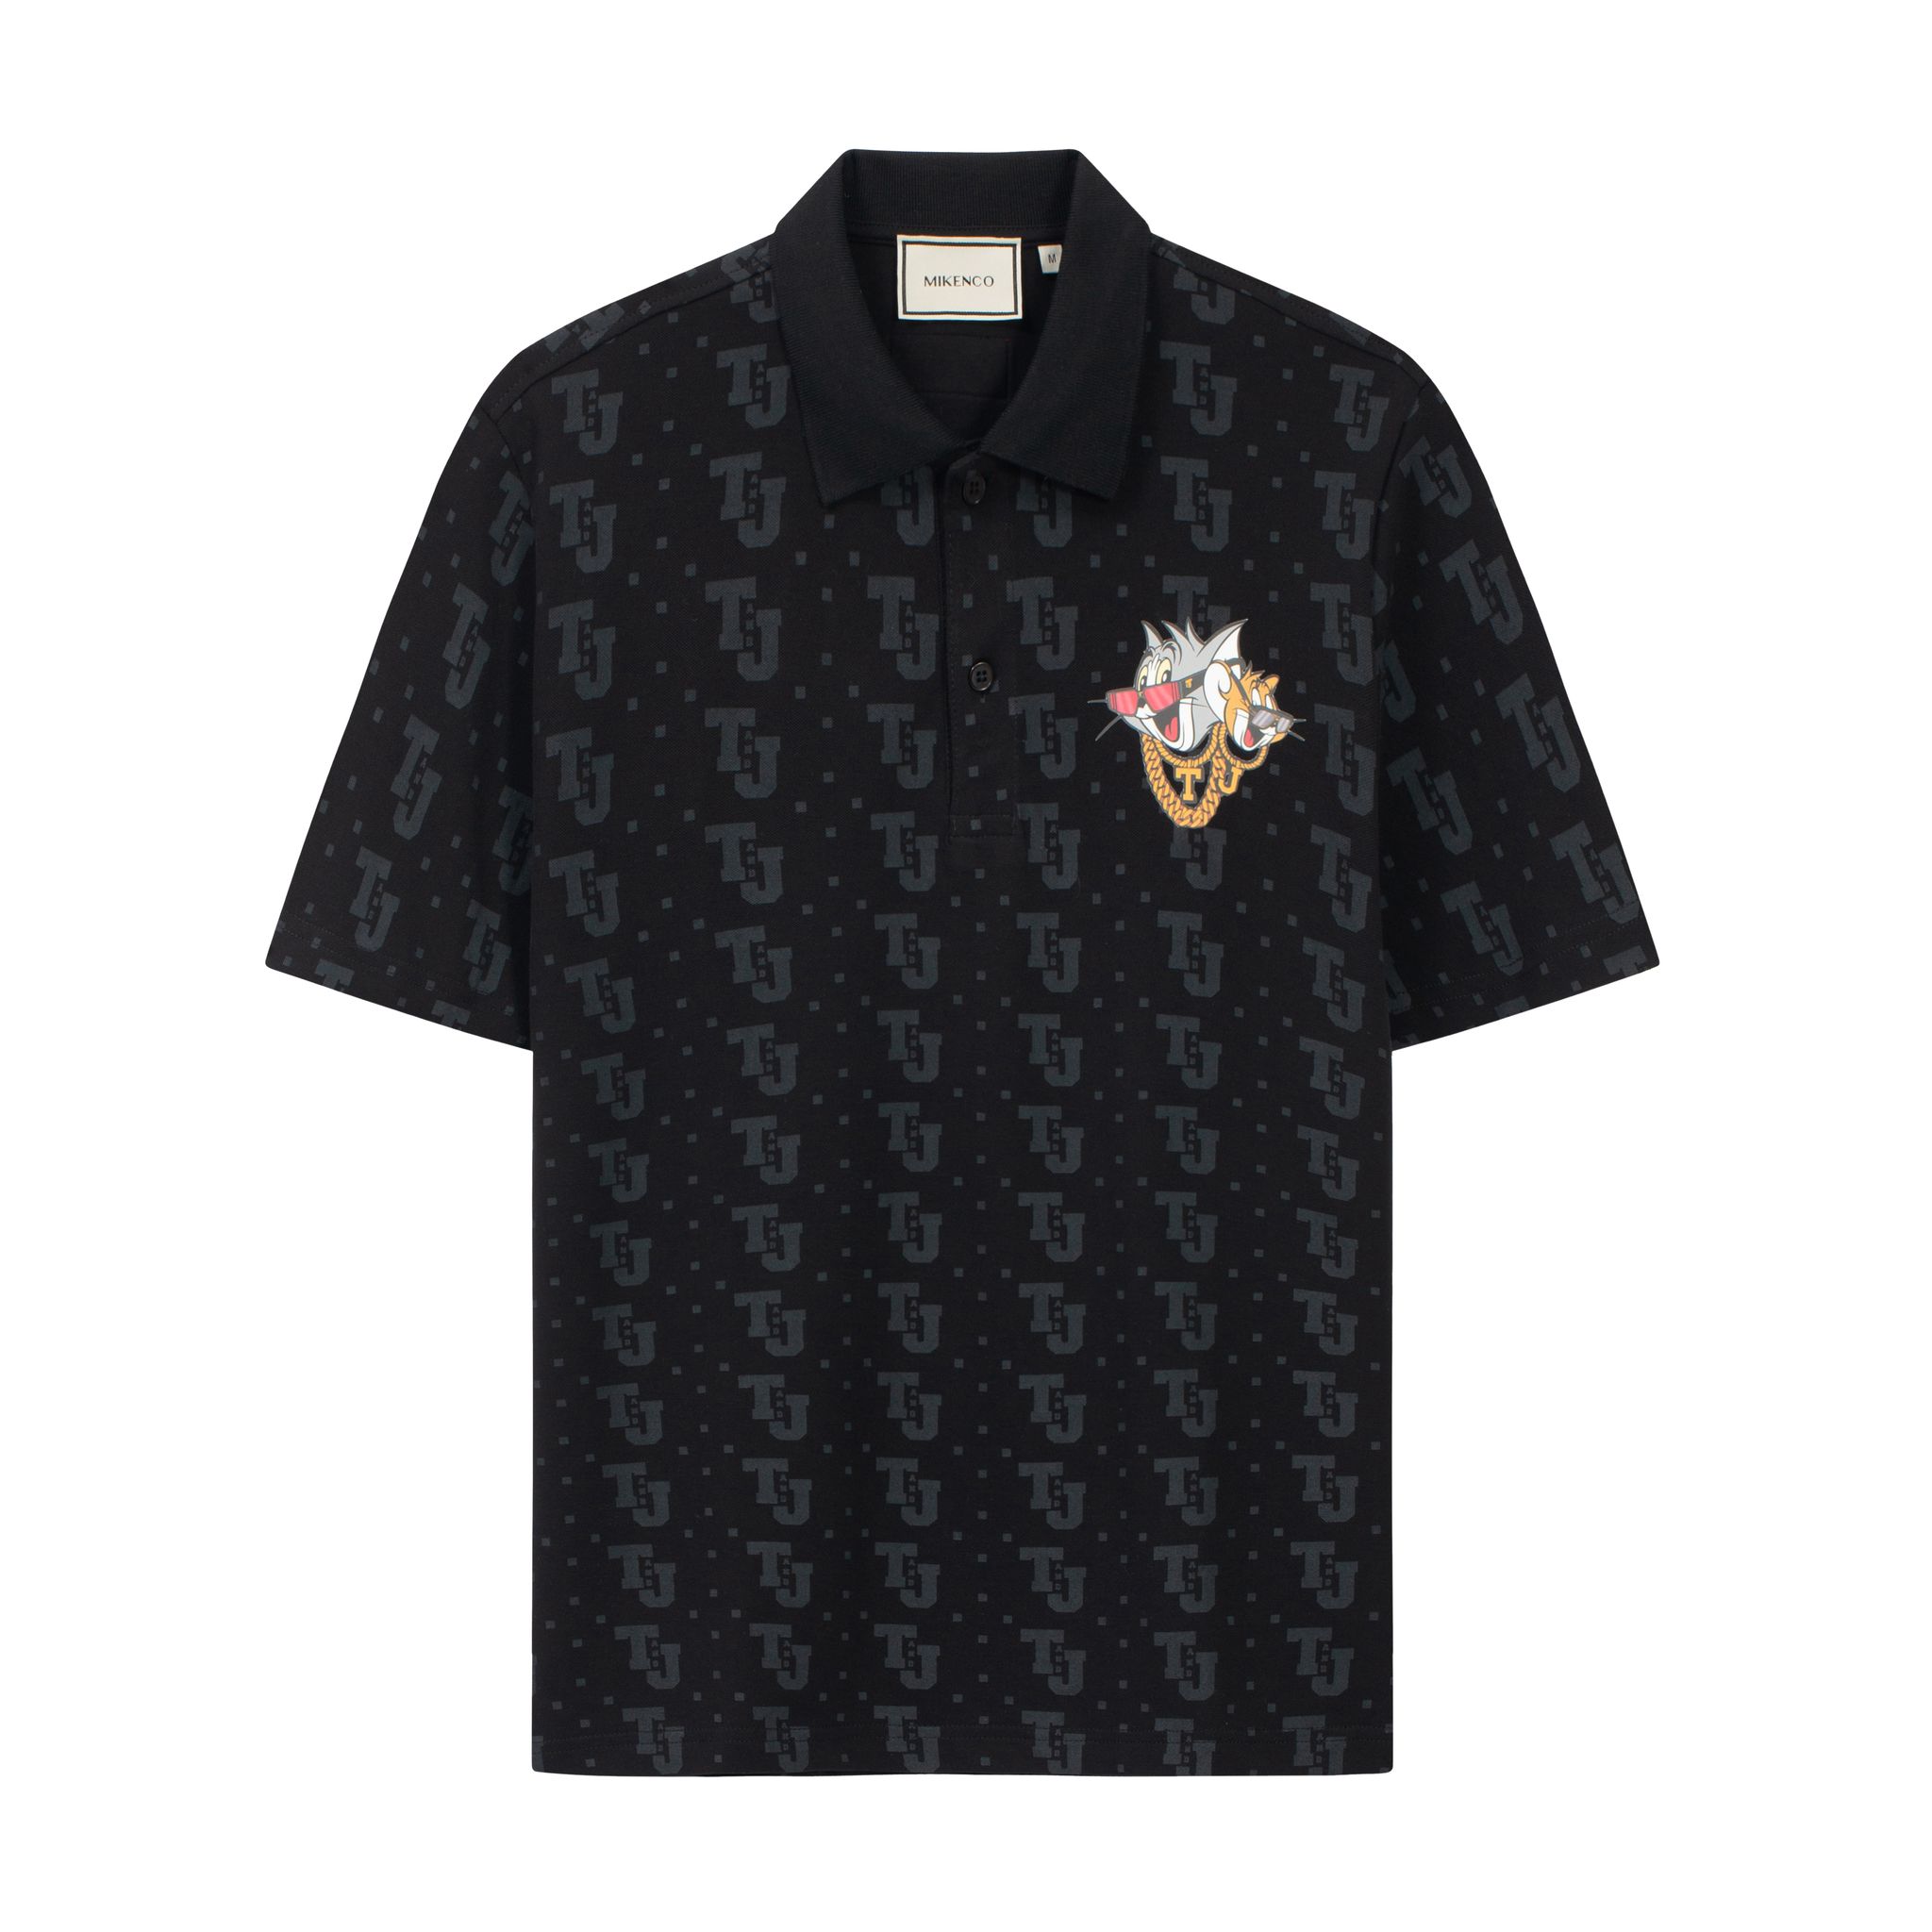 TJ ALL PRINT POLO - Mikenco® Official Site